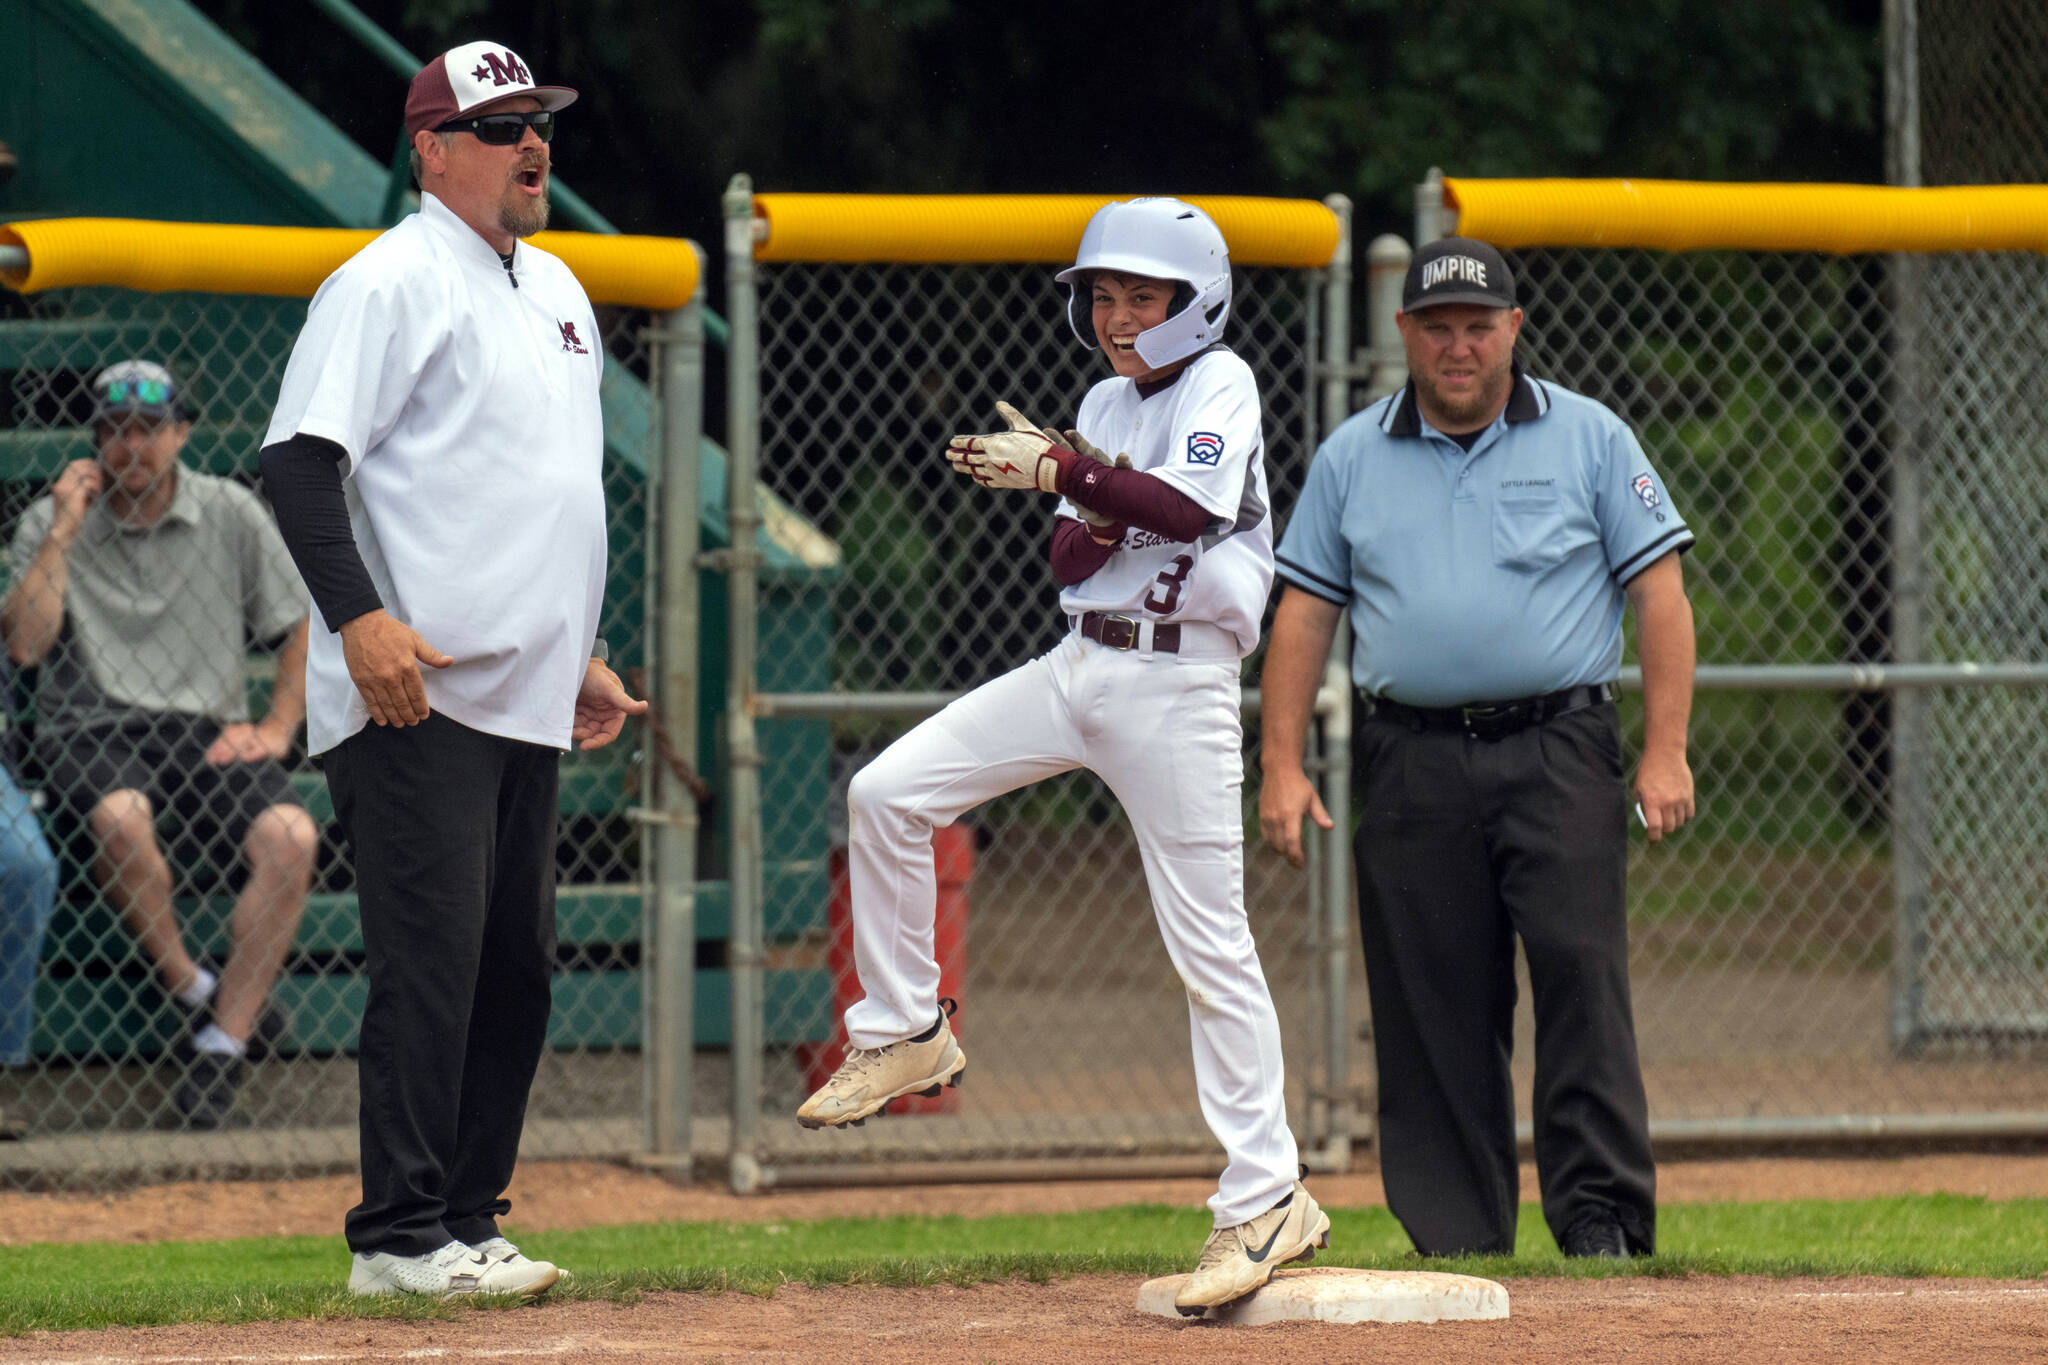 PHOTO BY FOREST WORGUM Montesano’s Brody Messick (3) celebrates after hitting a bases-clearing triple in a 12-4 win over Aberdeen in a Majors Division District 3 Tournament first-round game on Saturday in Centralia.